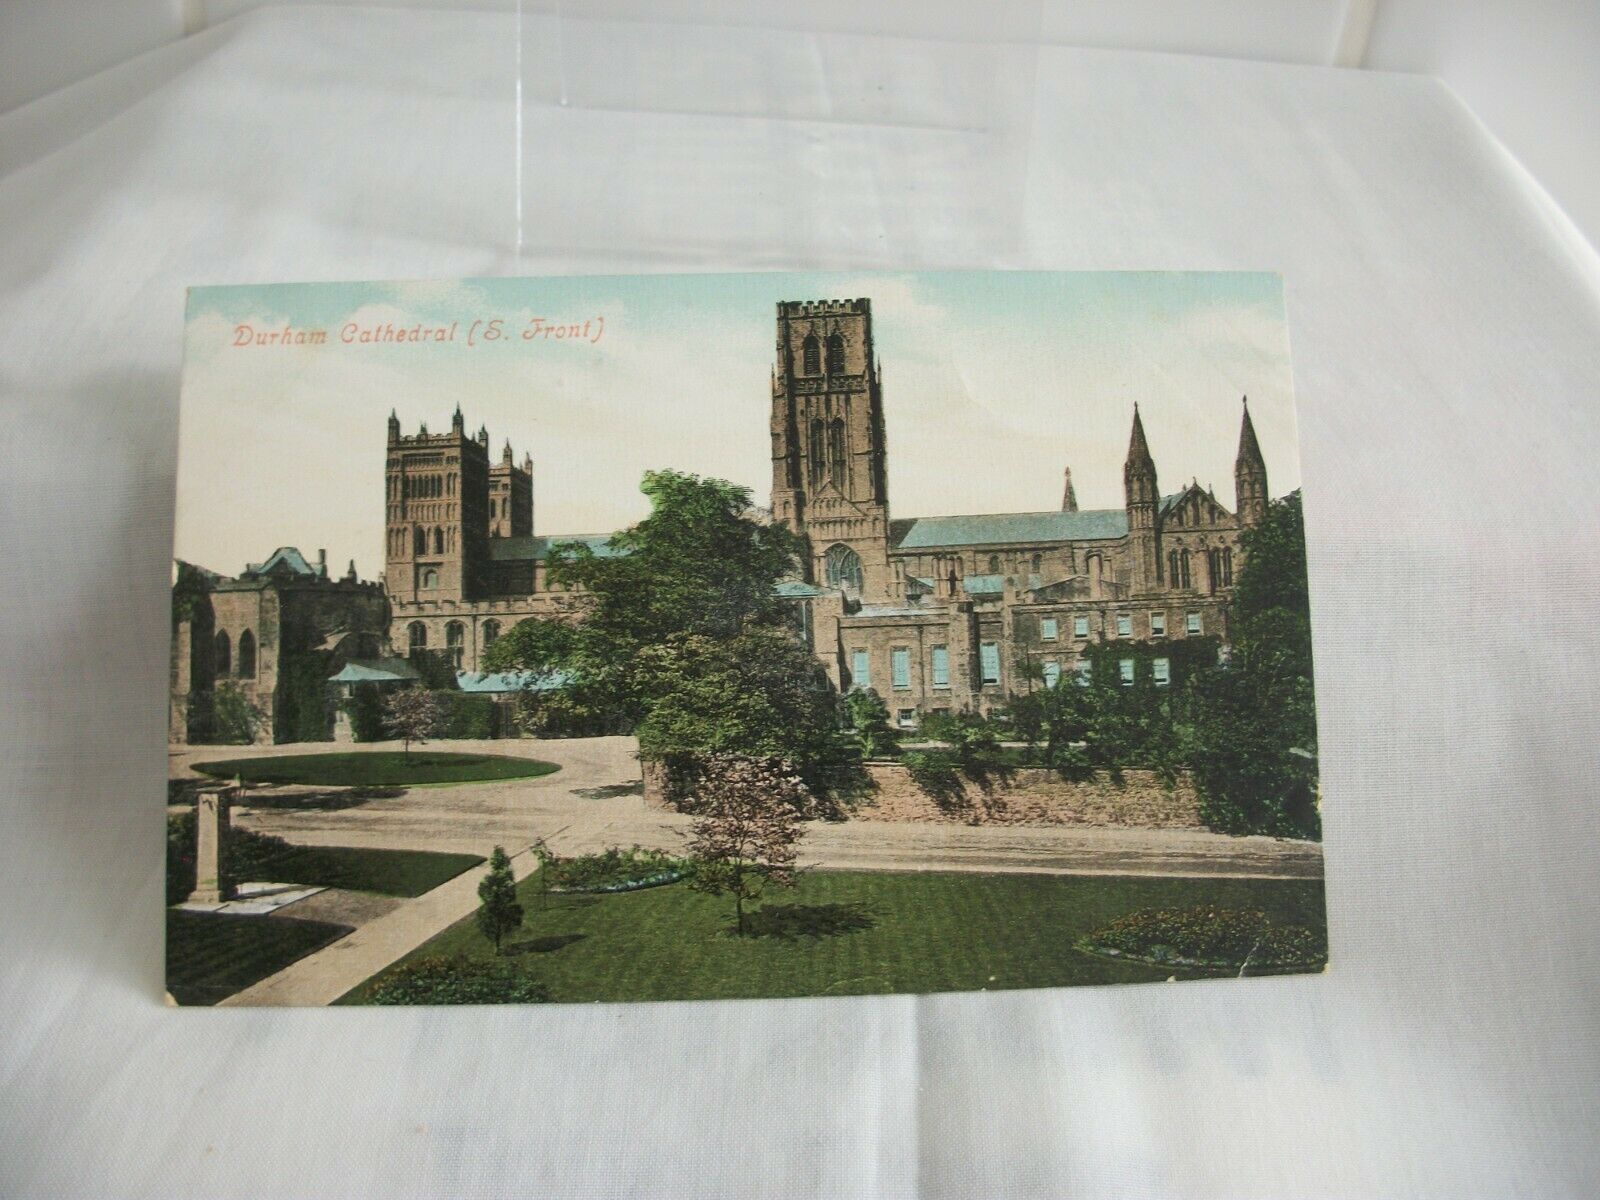 House Clearance - Old Service. Durham Cathedral  S. Front. Ref.036.